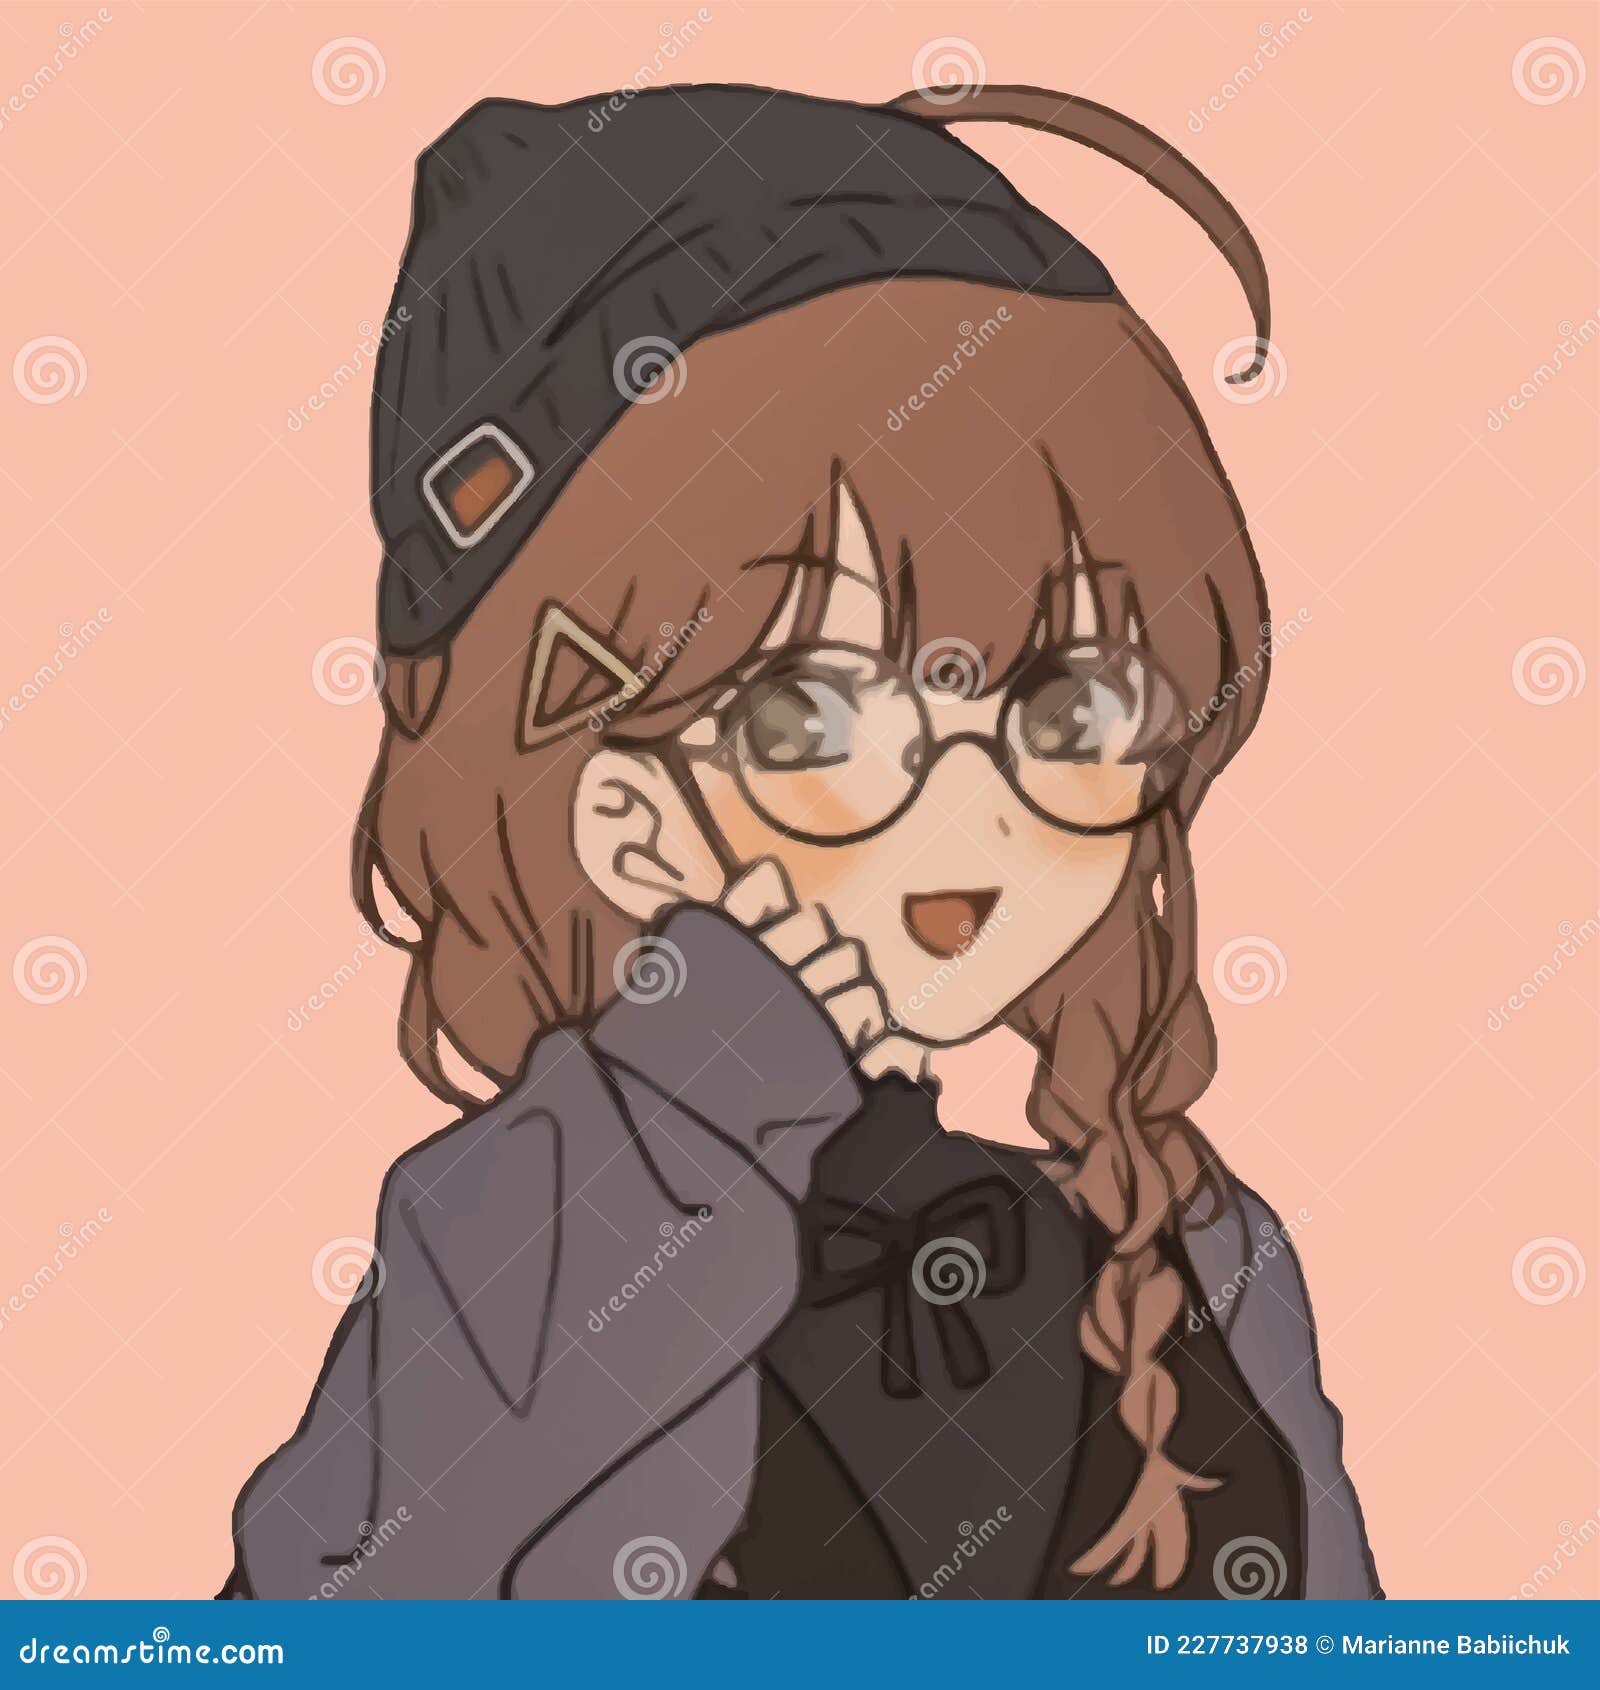 Cute Anime Girl with Glasses and a Hat Stock Vector - Illustration of